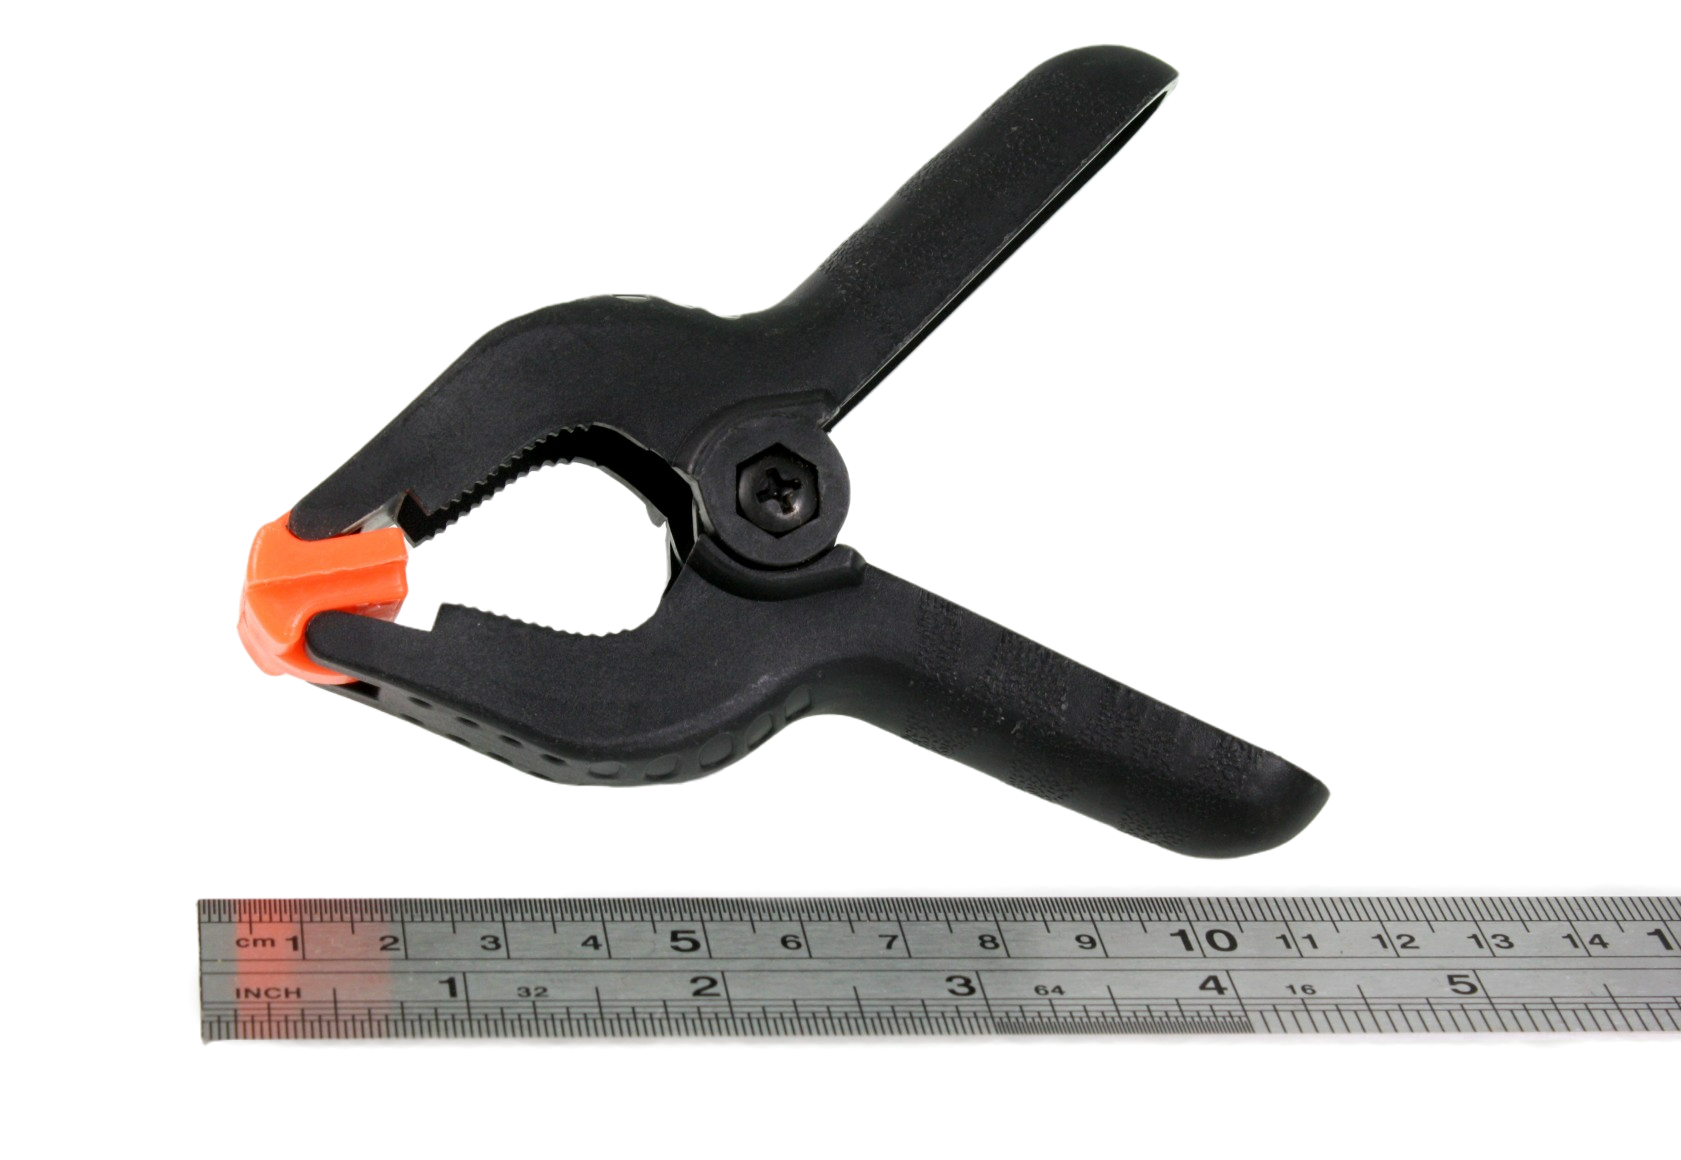 30mm spring clamp, next to a ruler, showing the total length to be just under 12cm